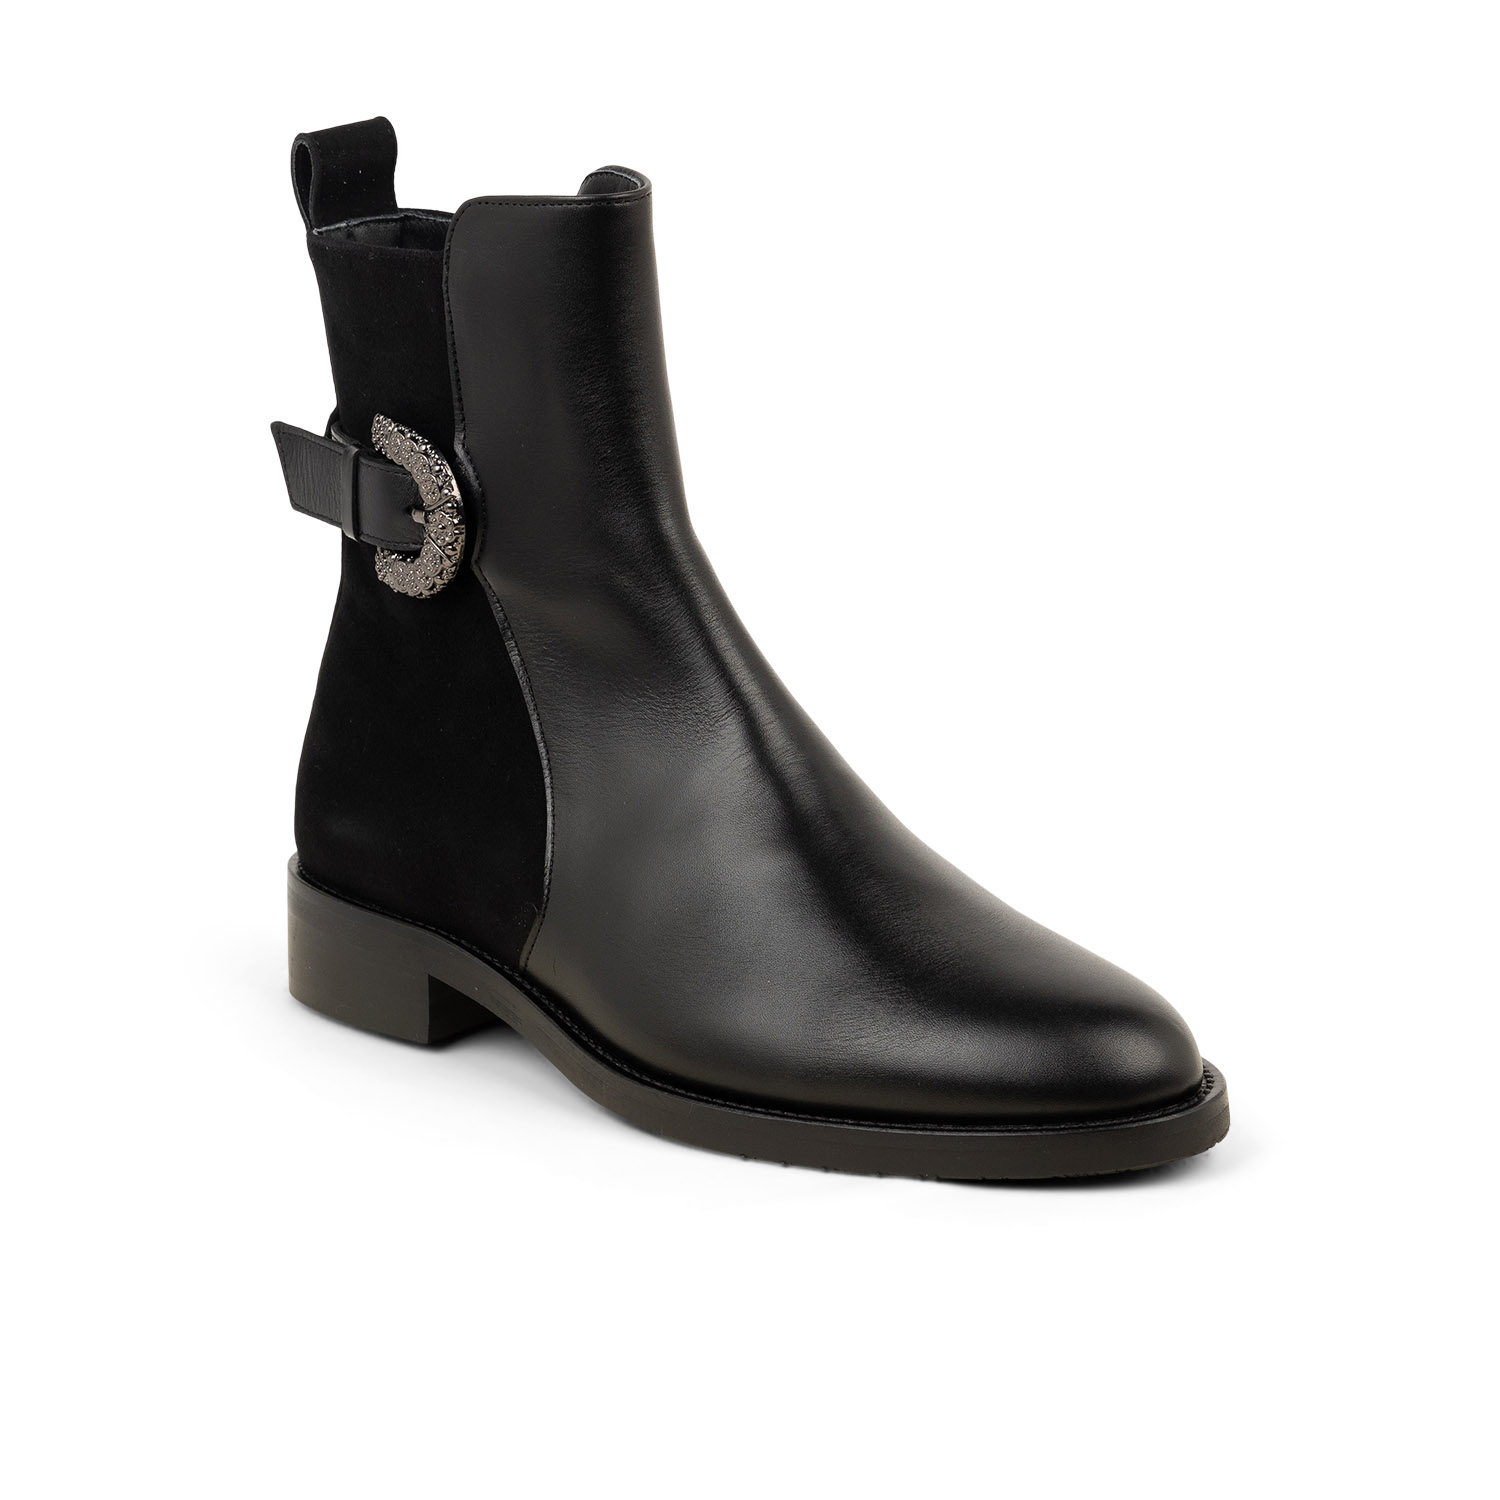 02 - PERTABOUCLE - PERTINI - Boots et bottines - Cuir